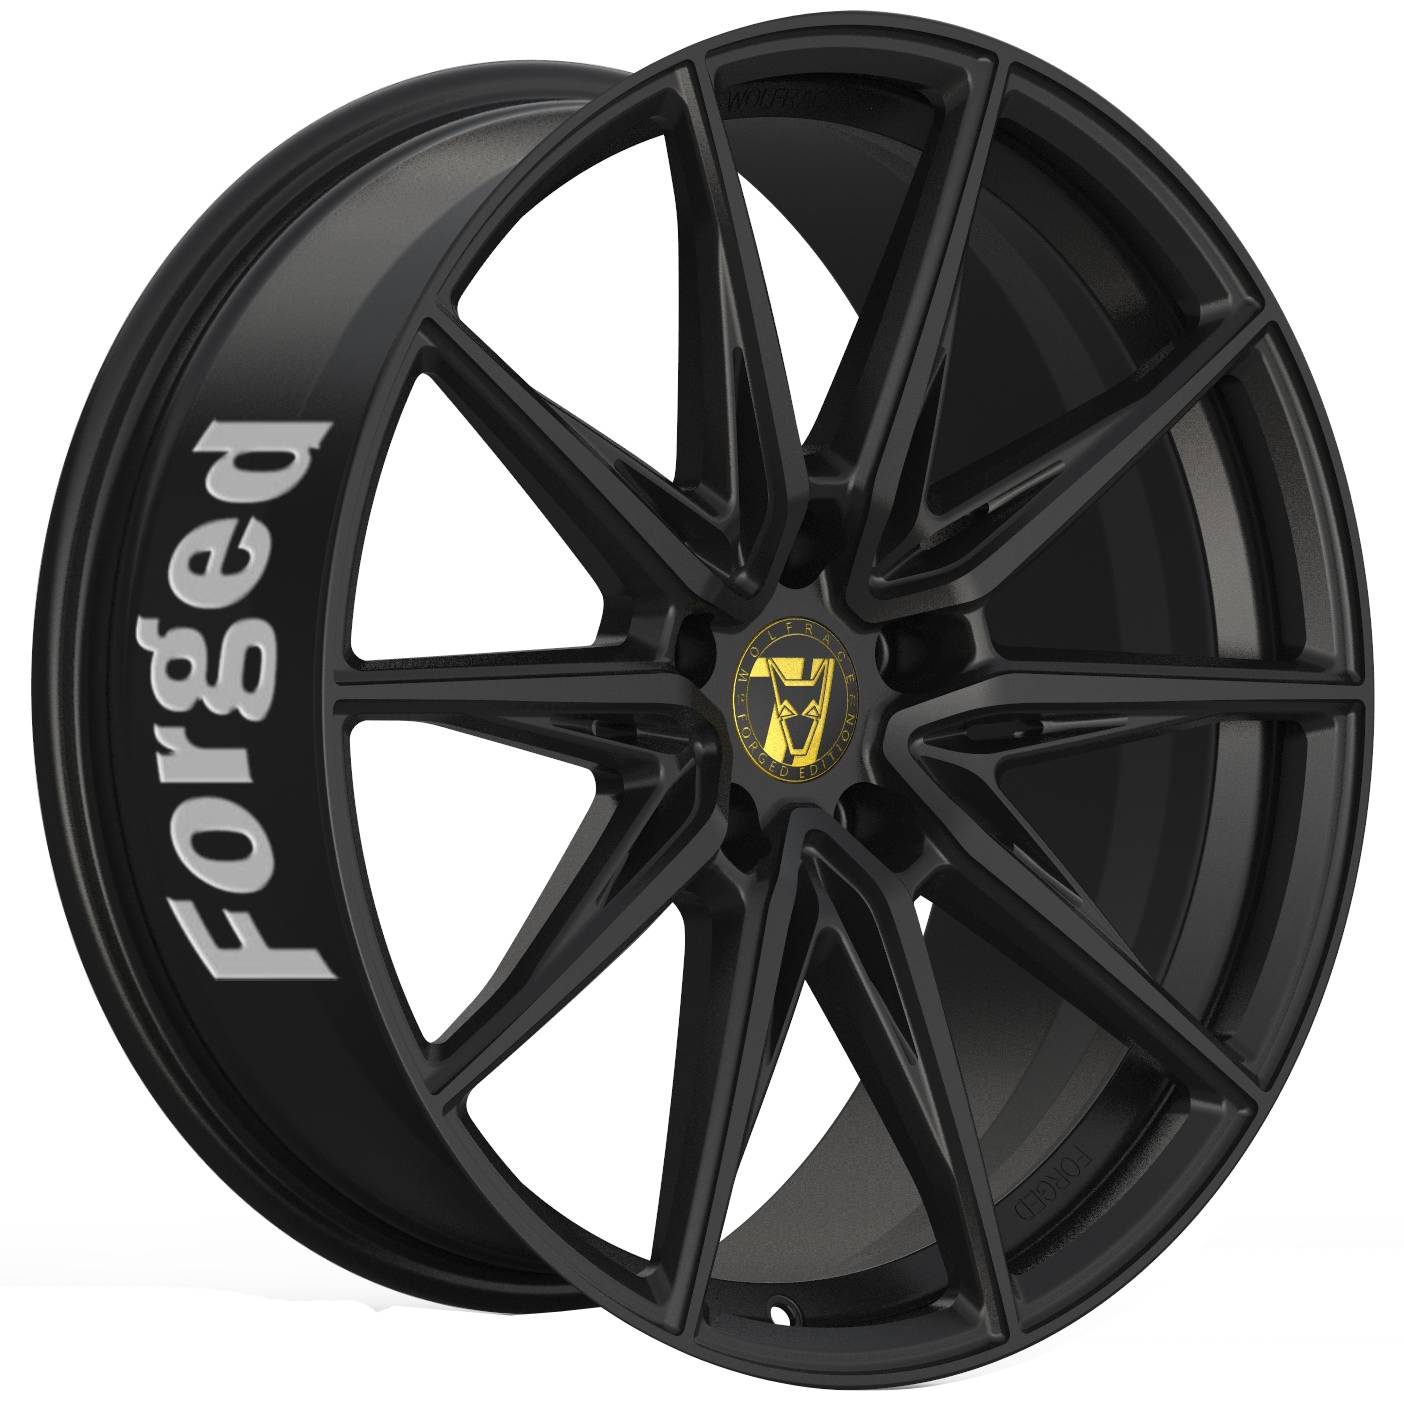 Demon Wheels 71 Forged Edition Urban Racer Forged [11x24] -5x130- ET 30